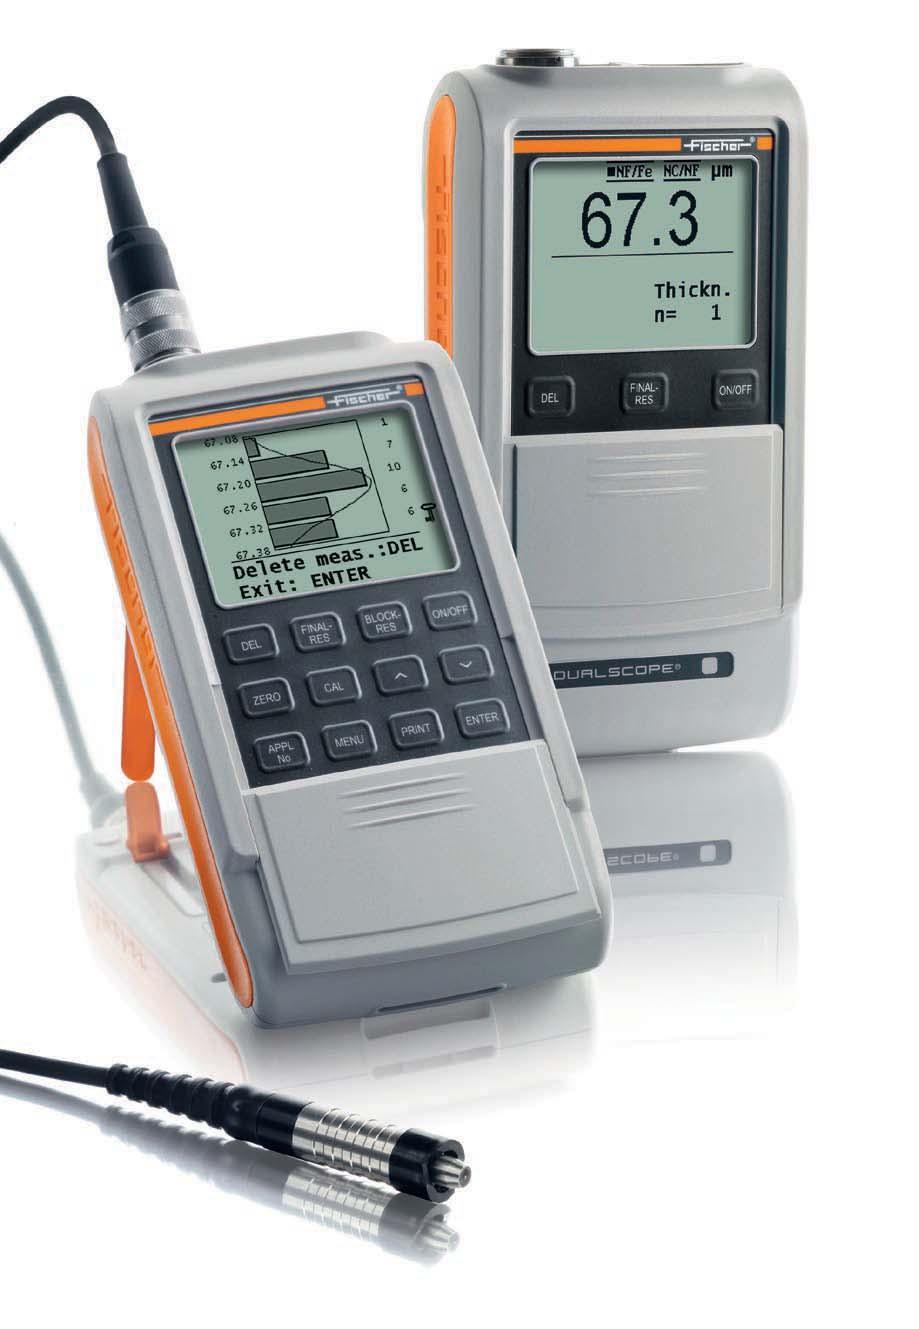 KK & S Instruments FMP10-40 Series Coating Thickness Measuring Instruments The flexible solution